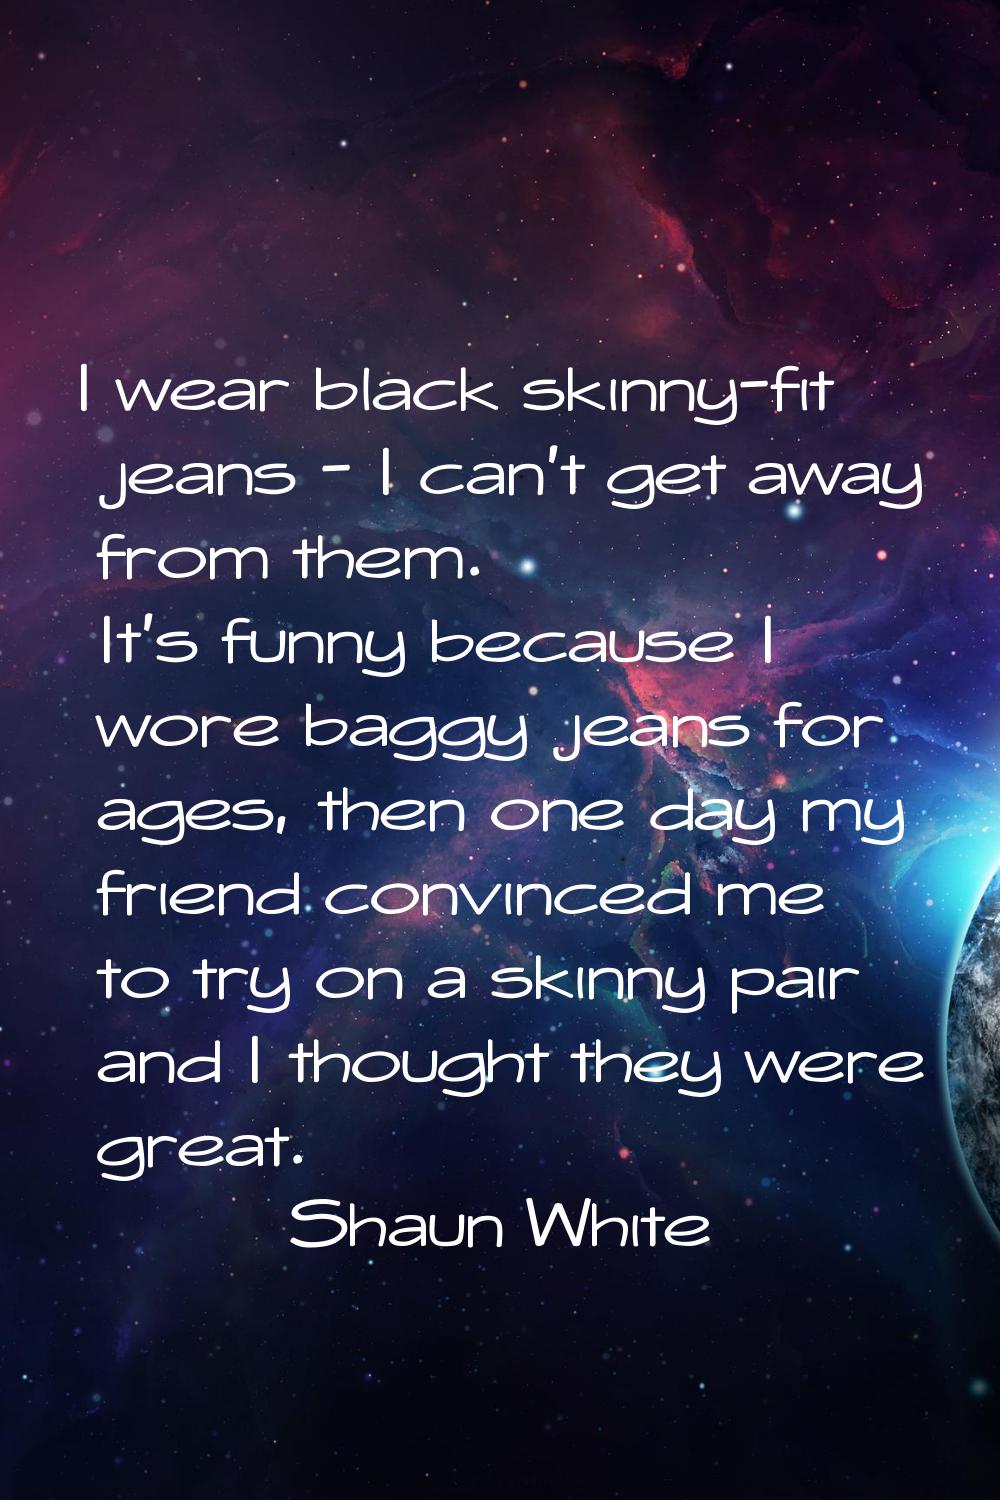 I wear black skinny-fit jeans - I can't get away from them. It's funny because I wore baggy jeans f